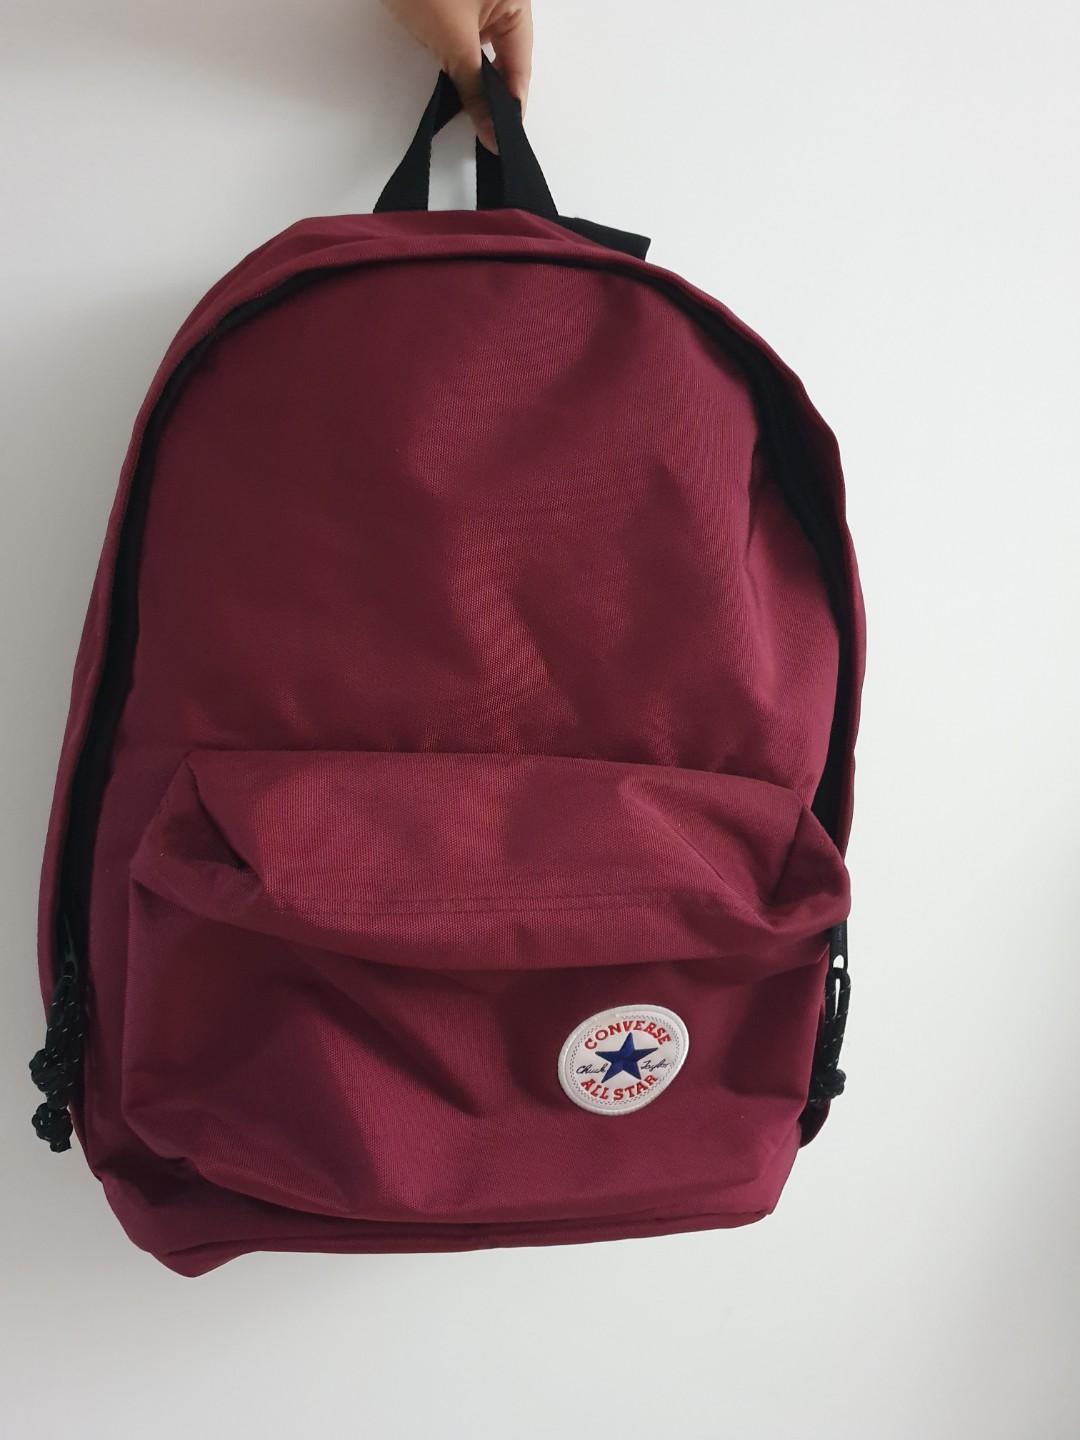 Authentic converse backpack maroon 